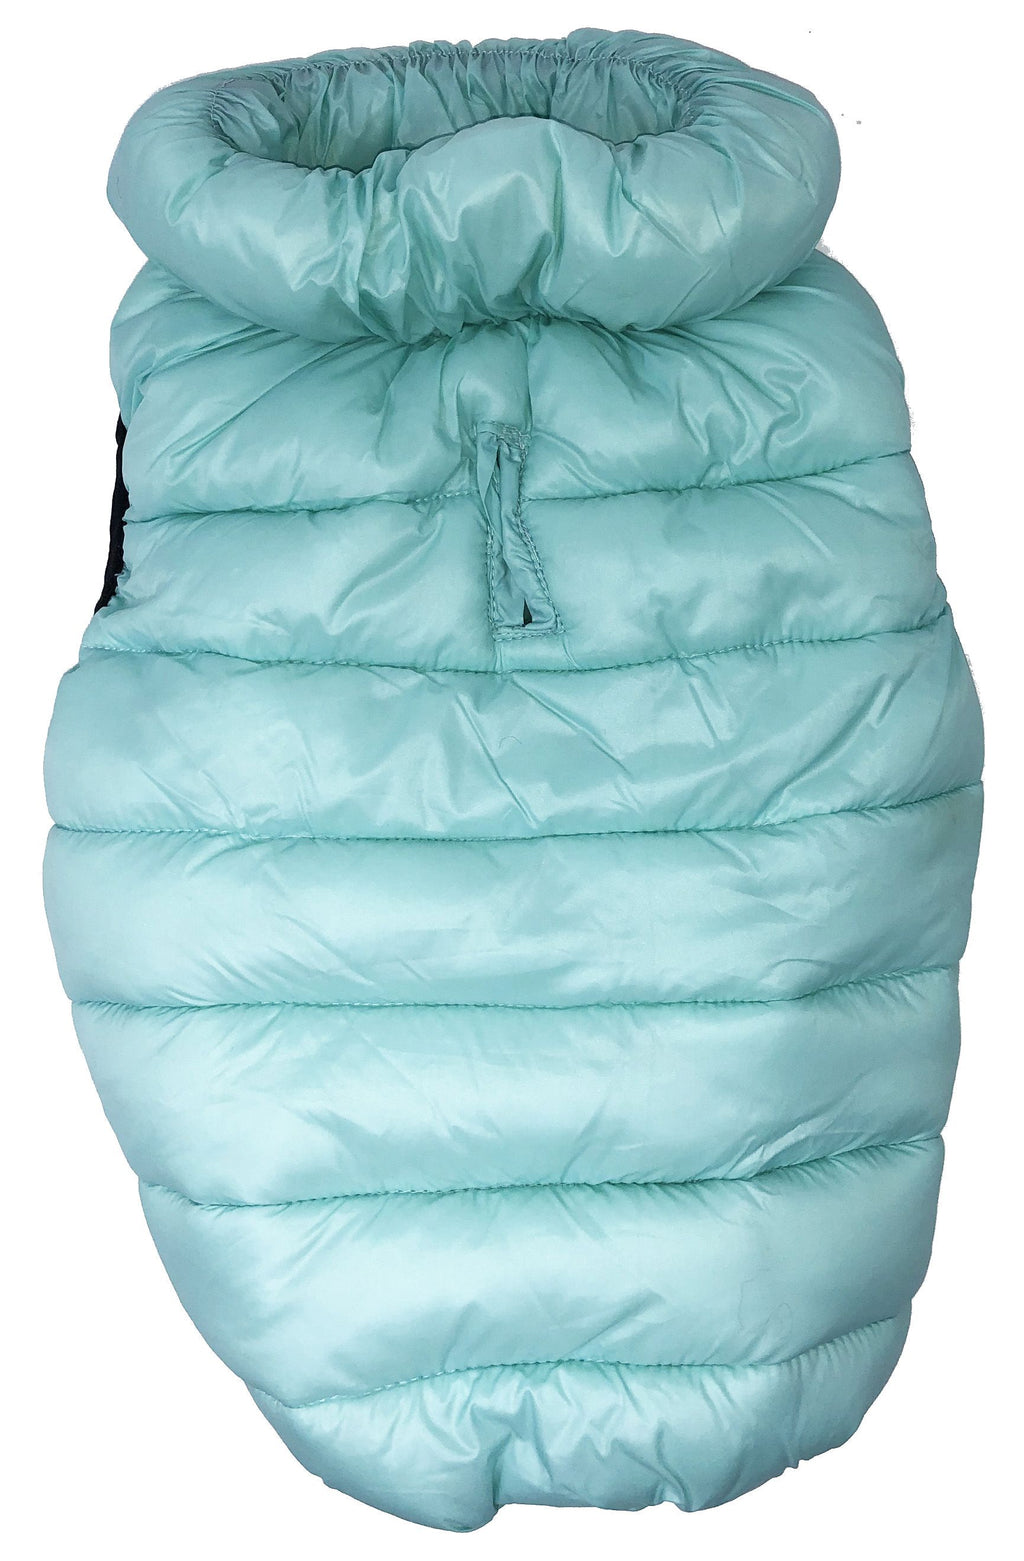 Pet Life ® 'Pursuit' Quilted Ultra-Plush Thermal Dog Jacket Aqua X-Small